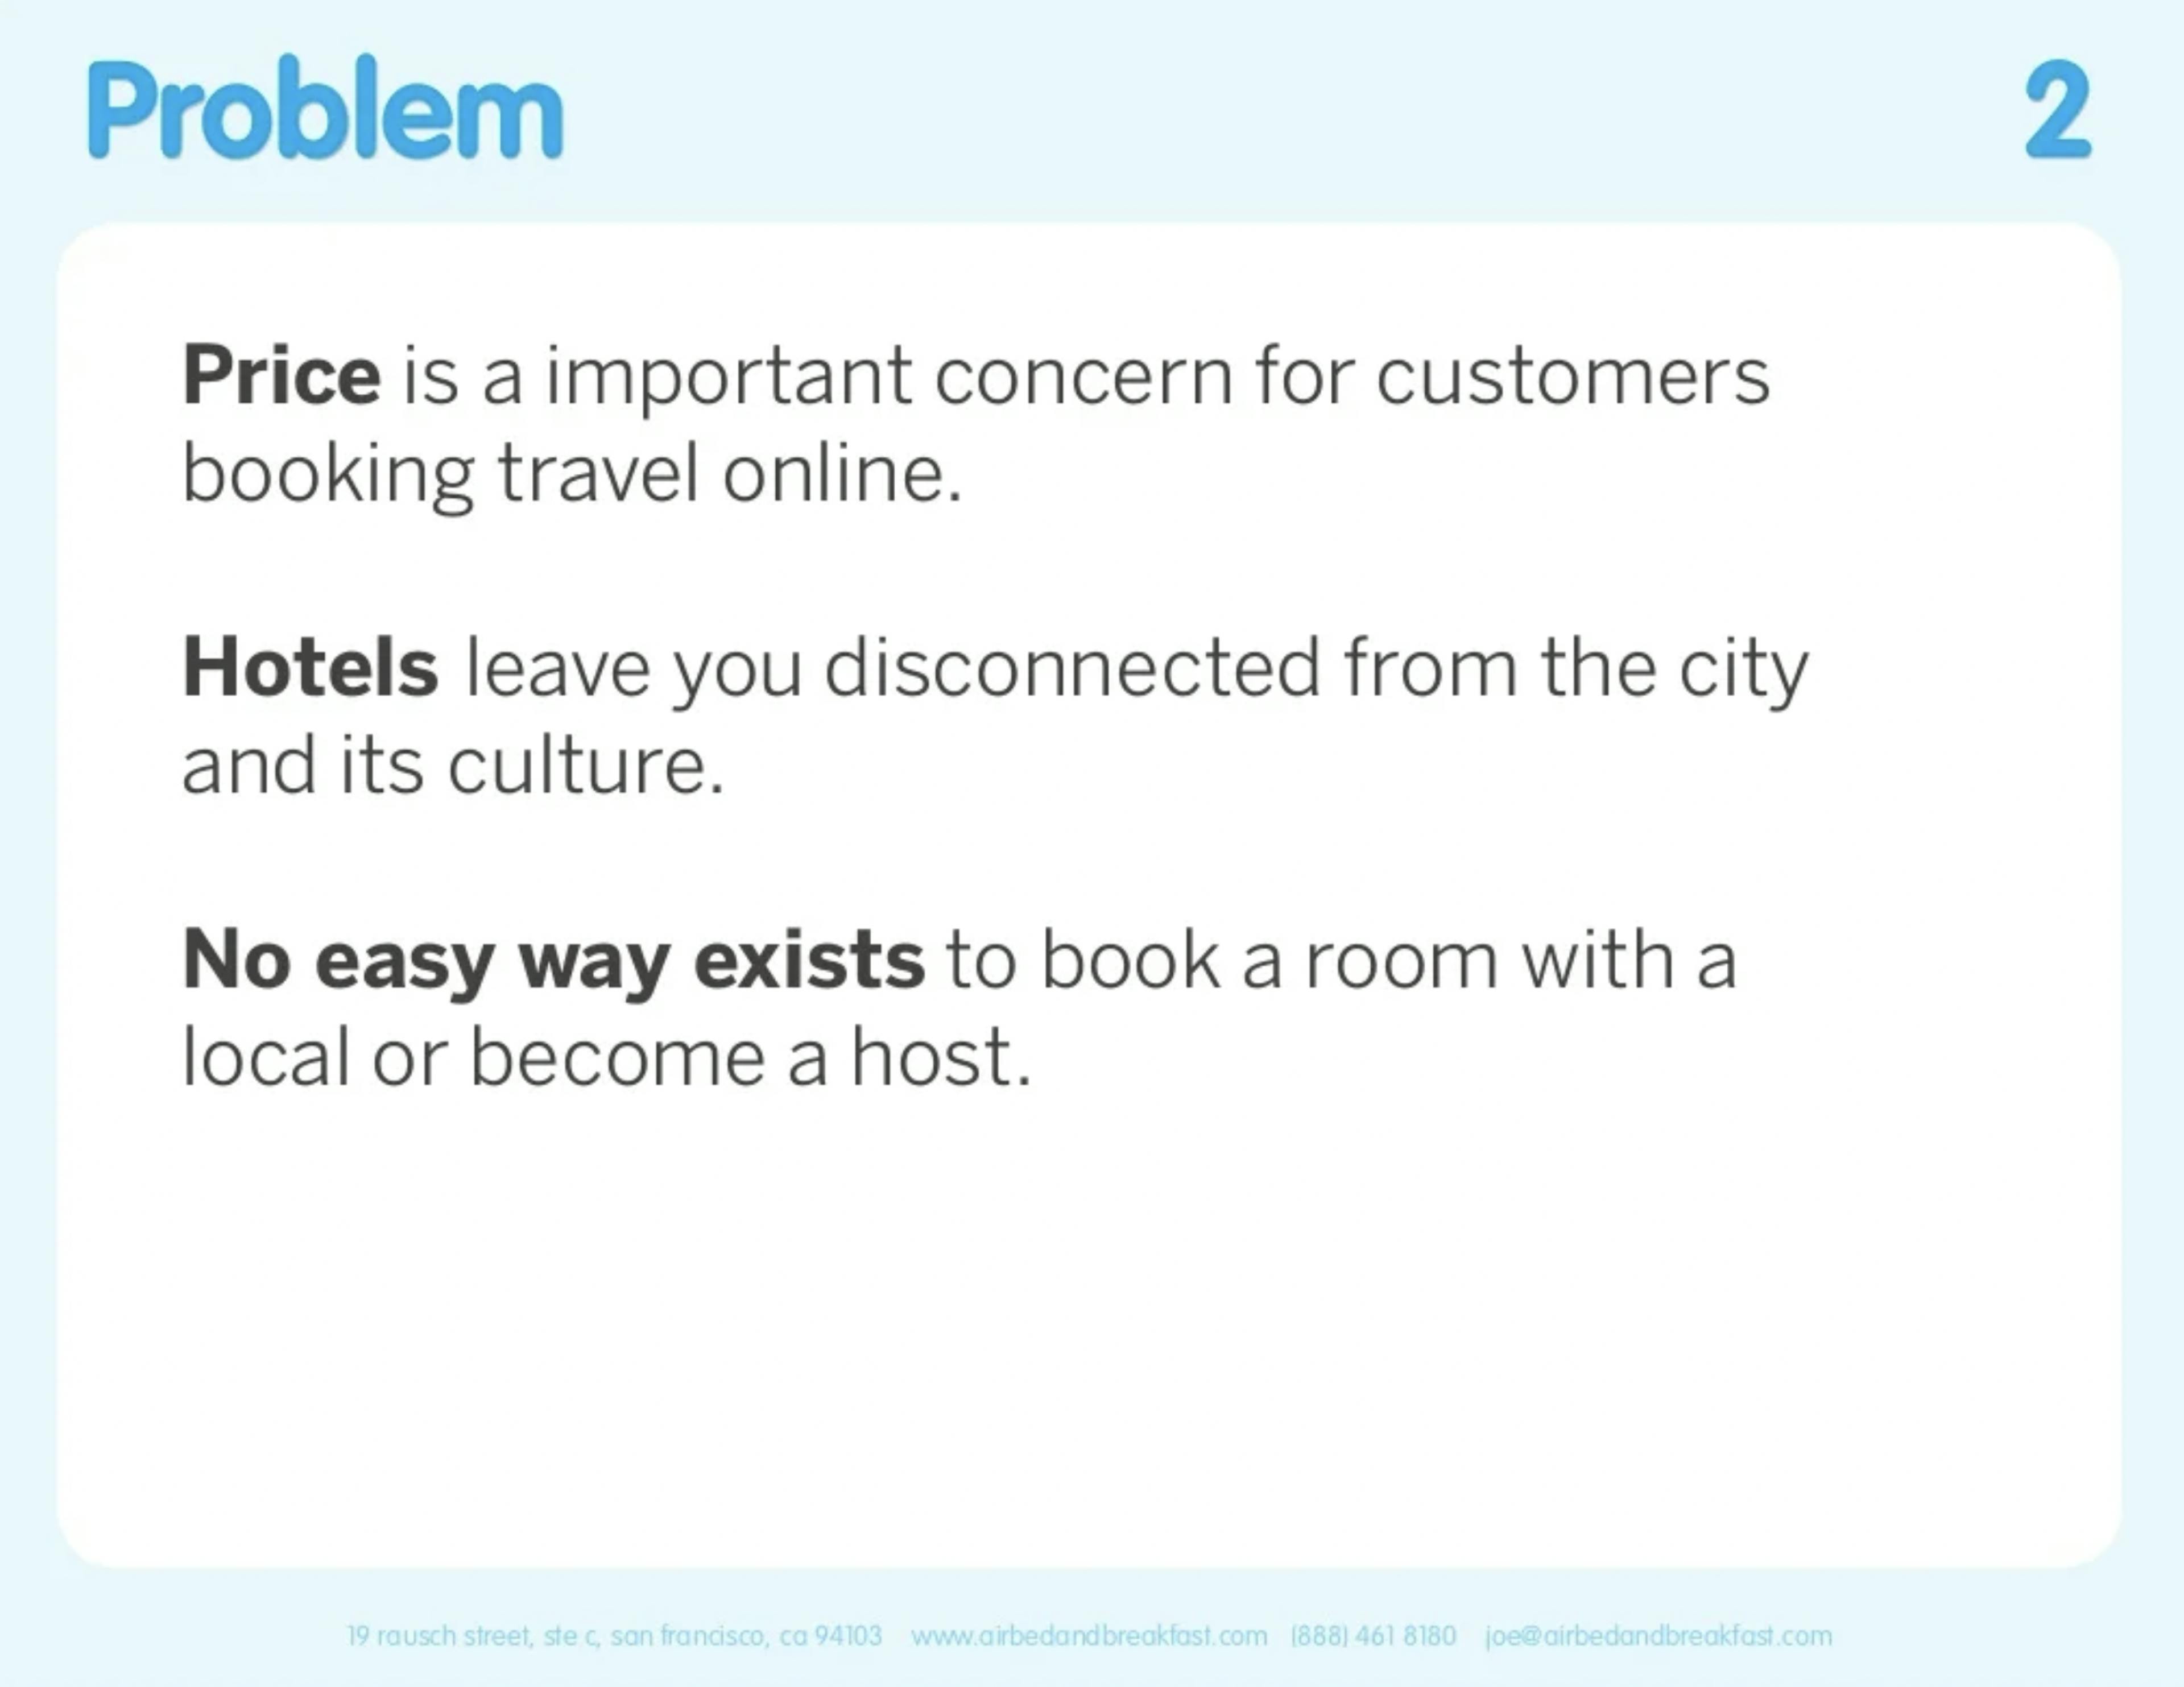 Source: Airbnb’s early-stage deck, PitchDeckHunt 